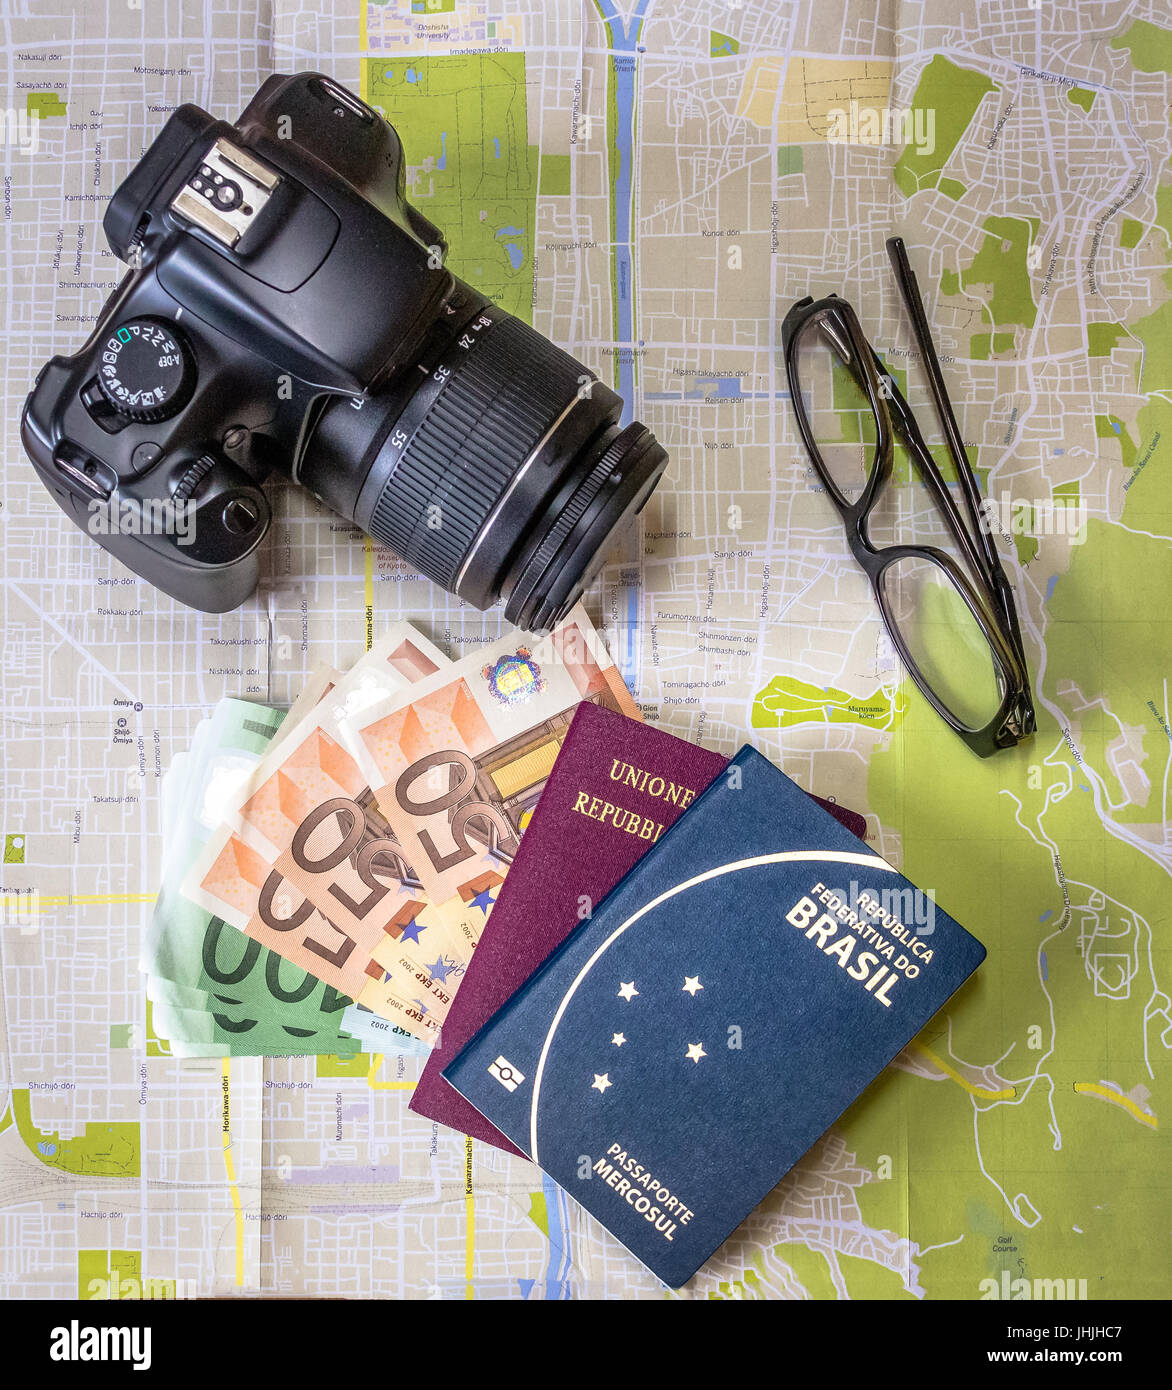 Planning a trip - Brazilian and Italian passports on city map with euro bills money, camera and glasses Stock Photo